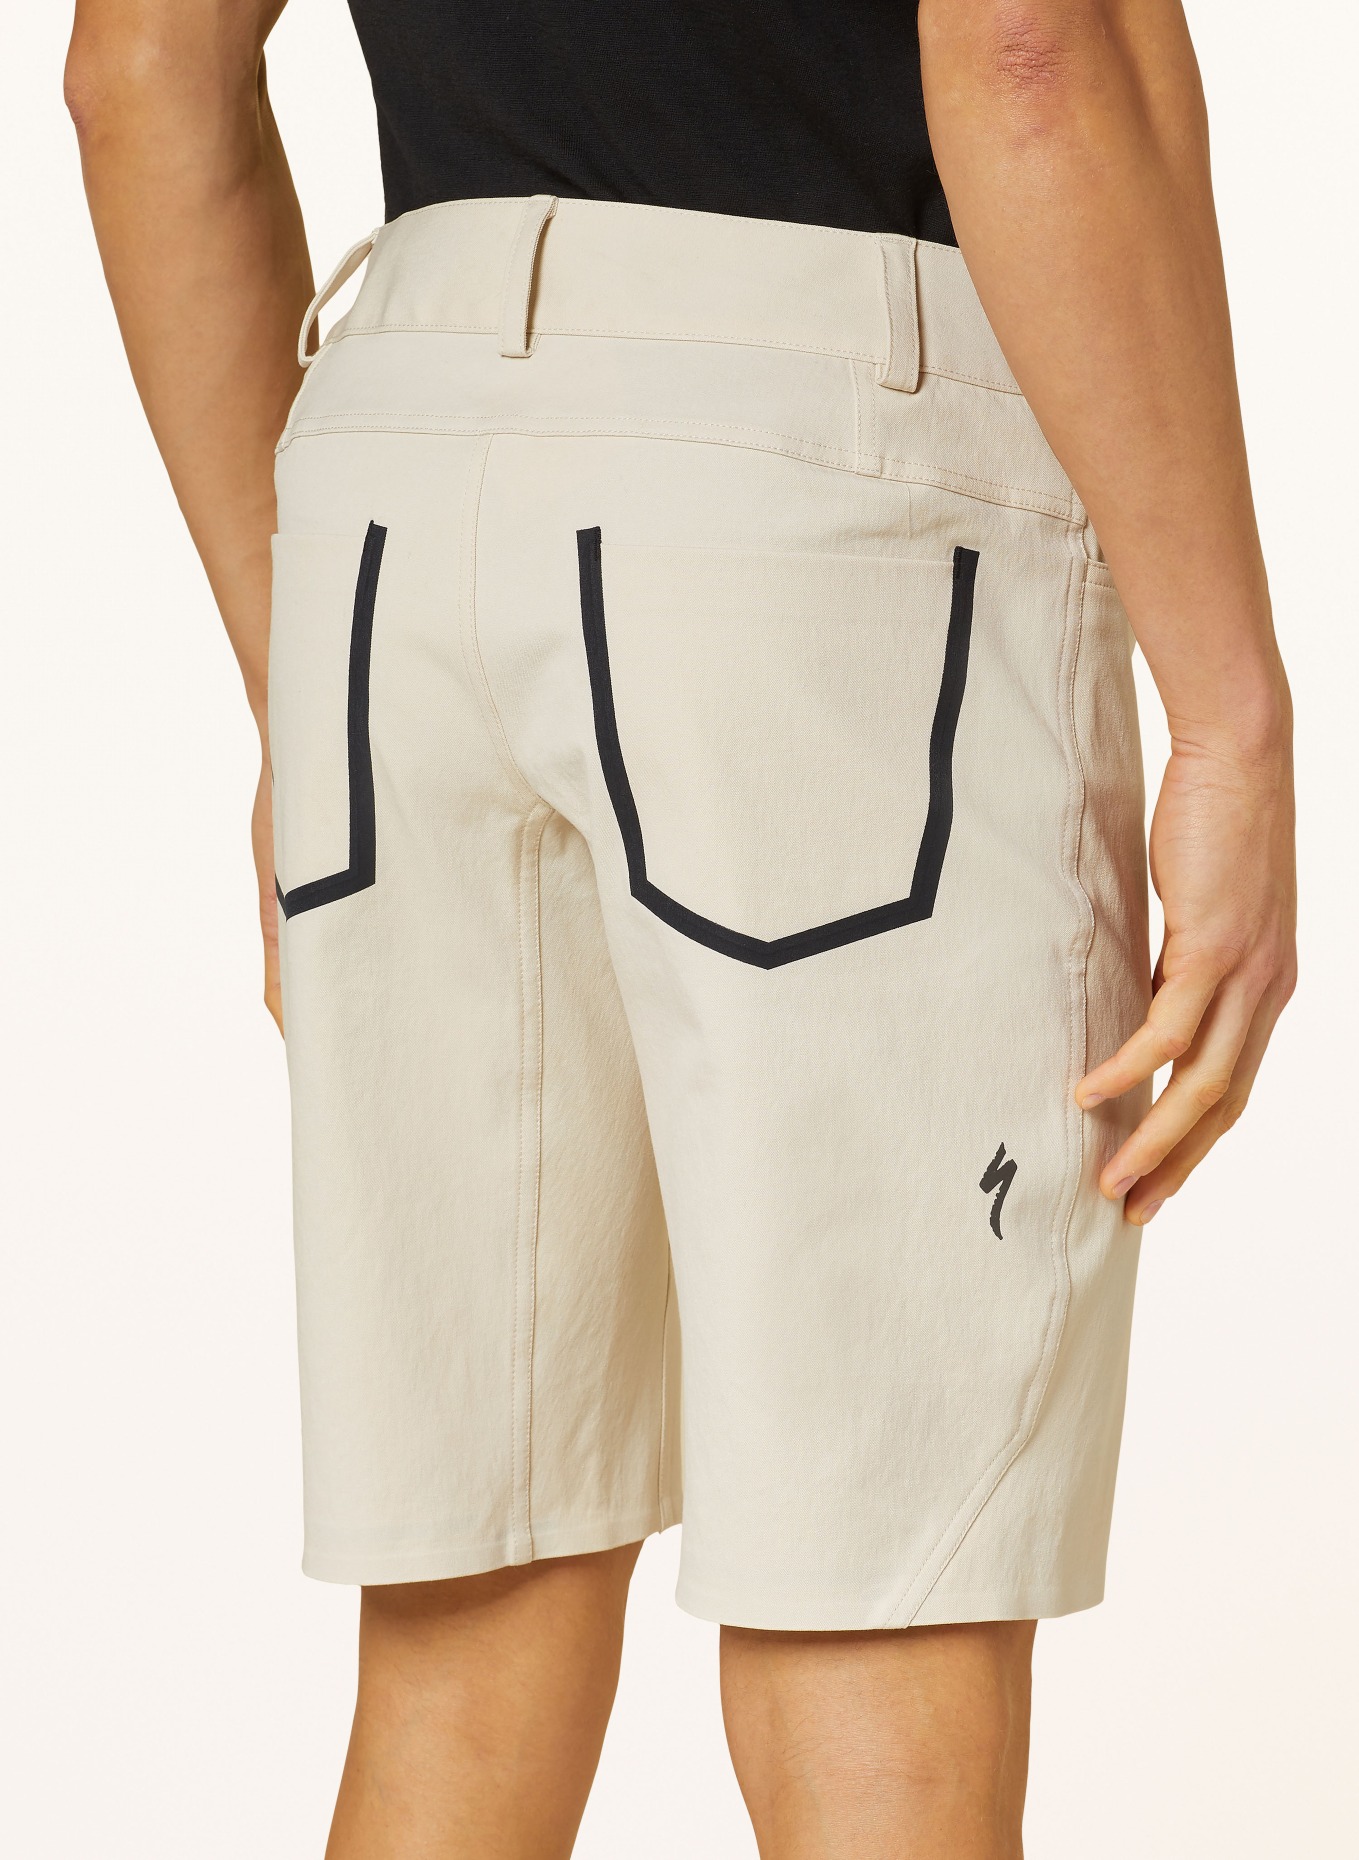 SPECIALIZED Cycling shorts ADV without padded insert, Color: CREAM (Image 6)